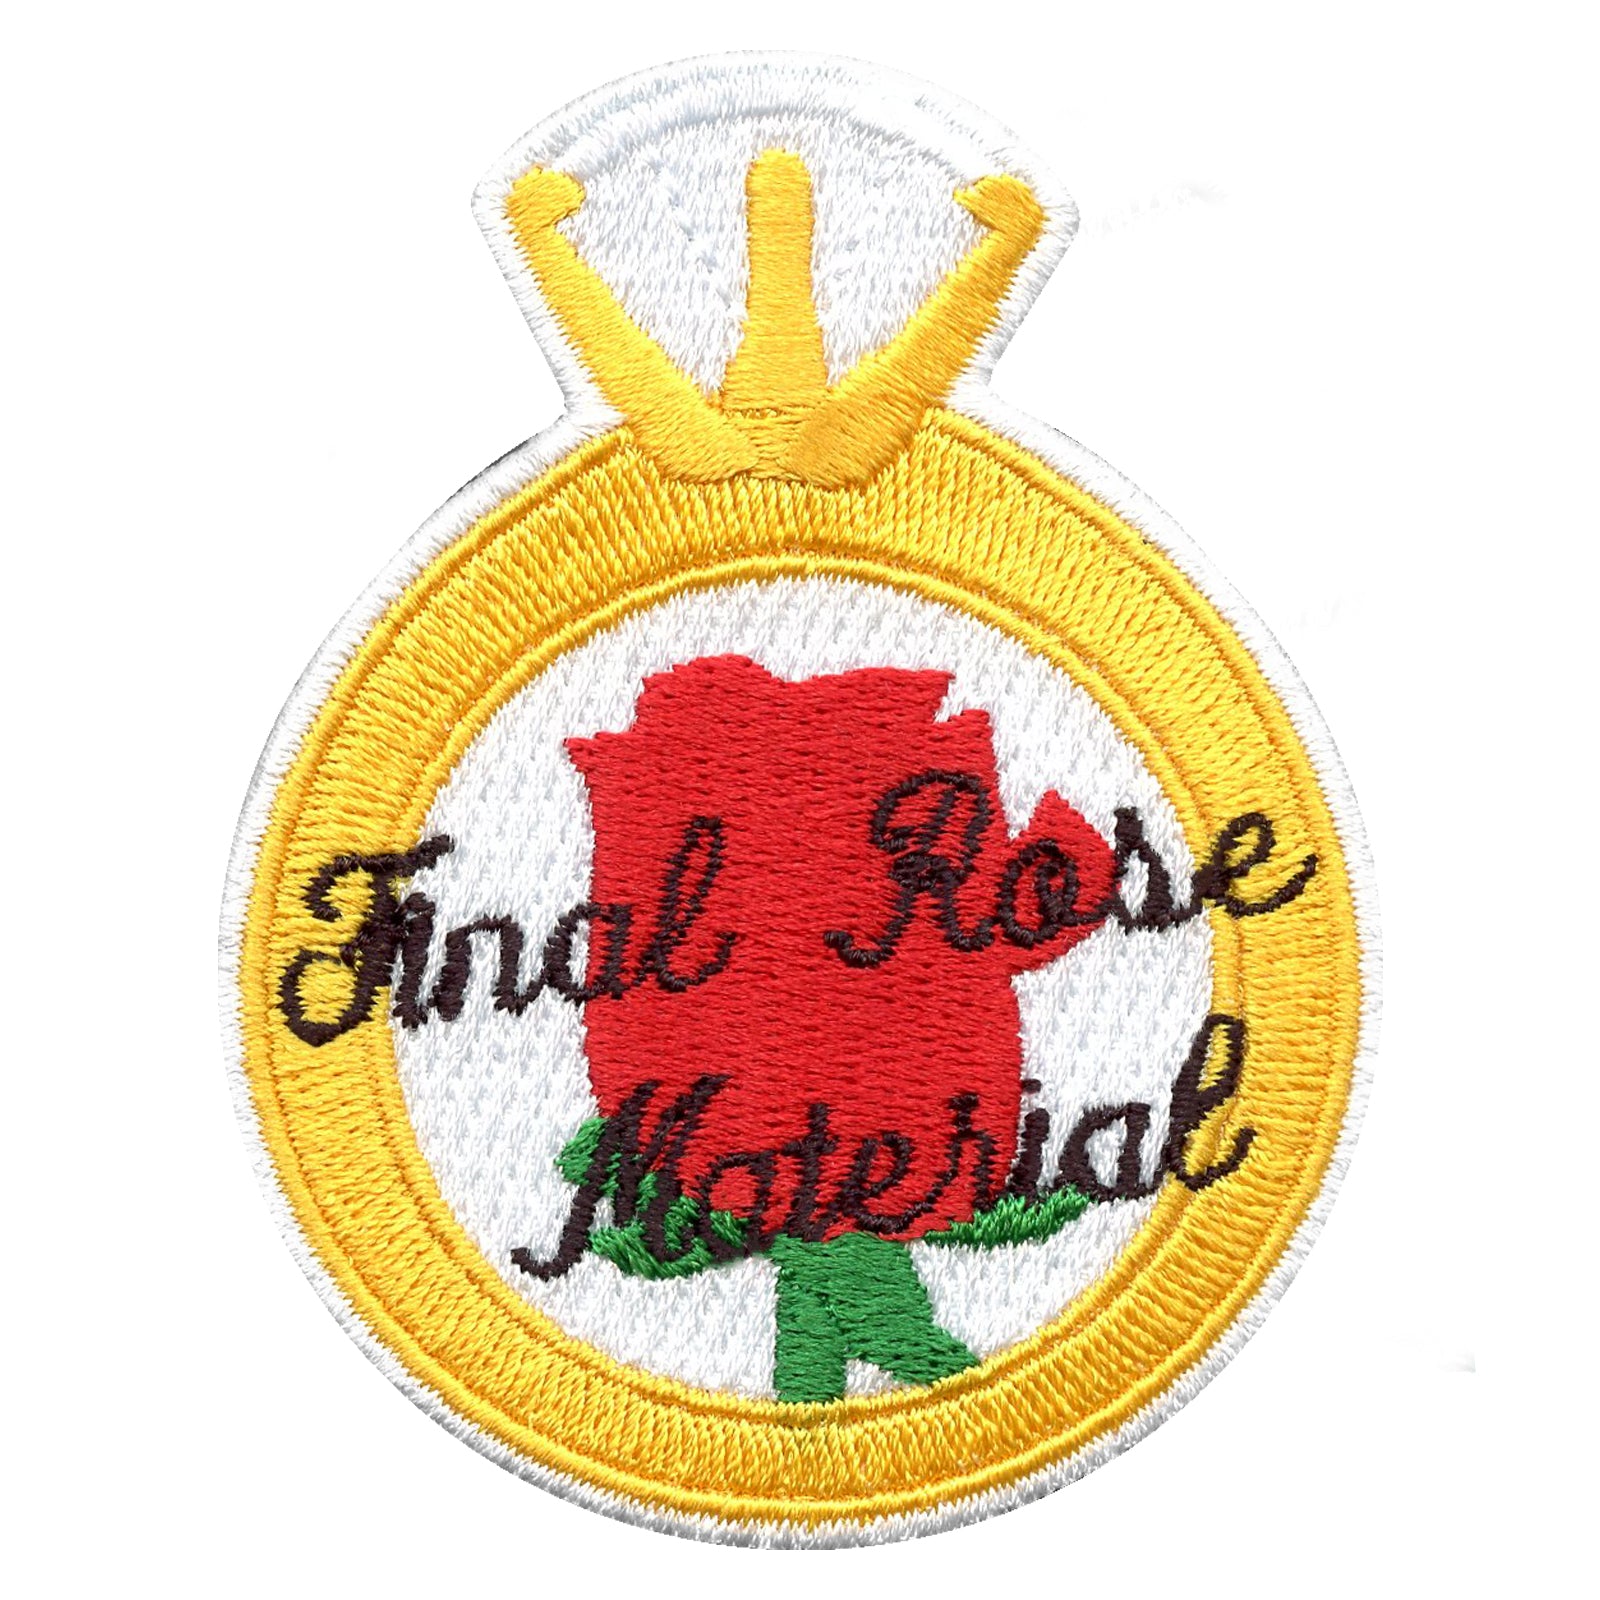 Diamond Ring "Final Rose Material" Embroidered Iron On Patch